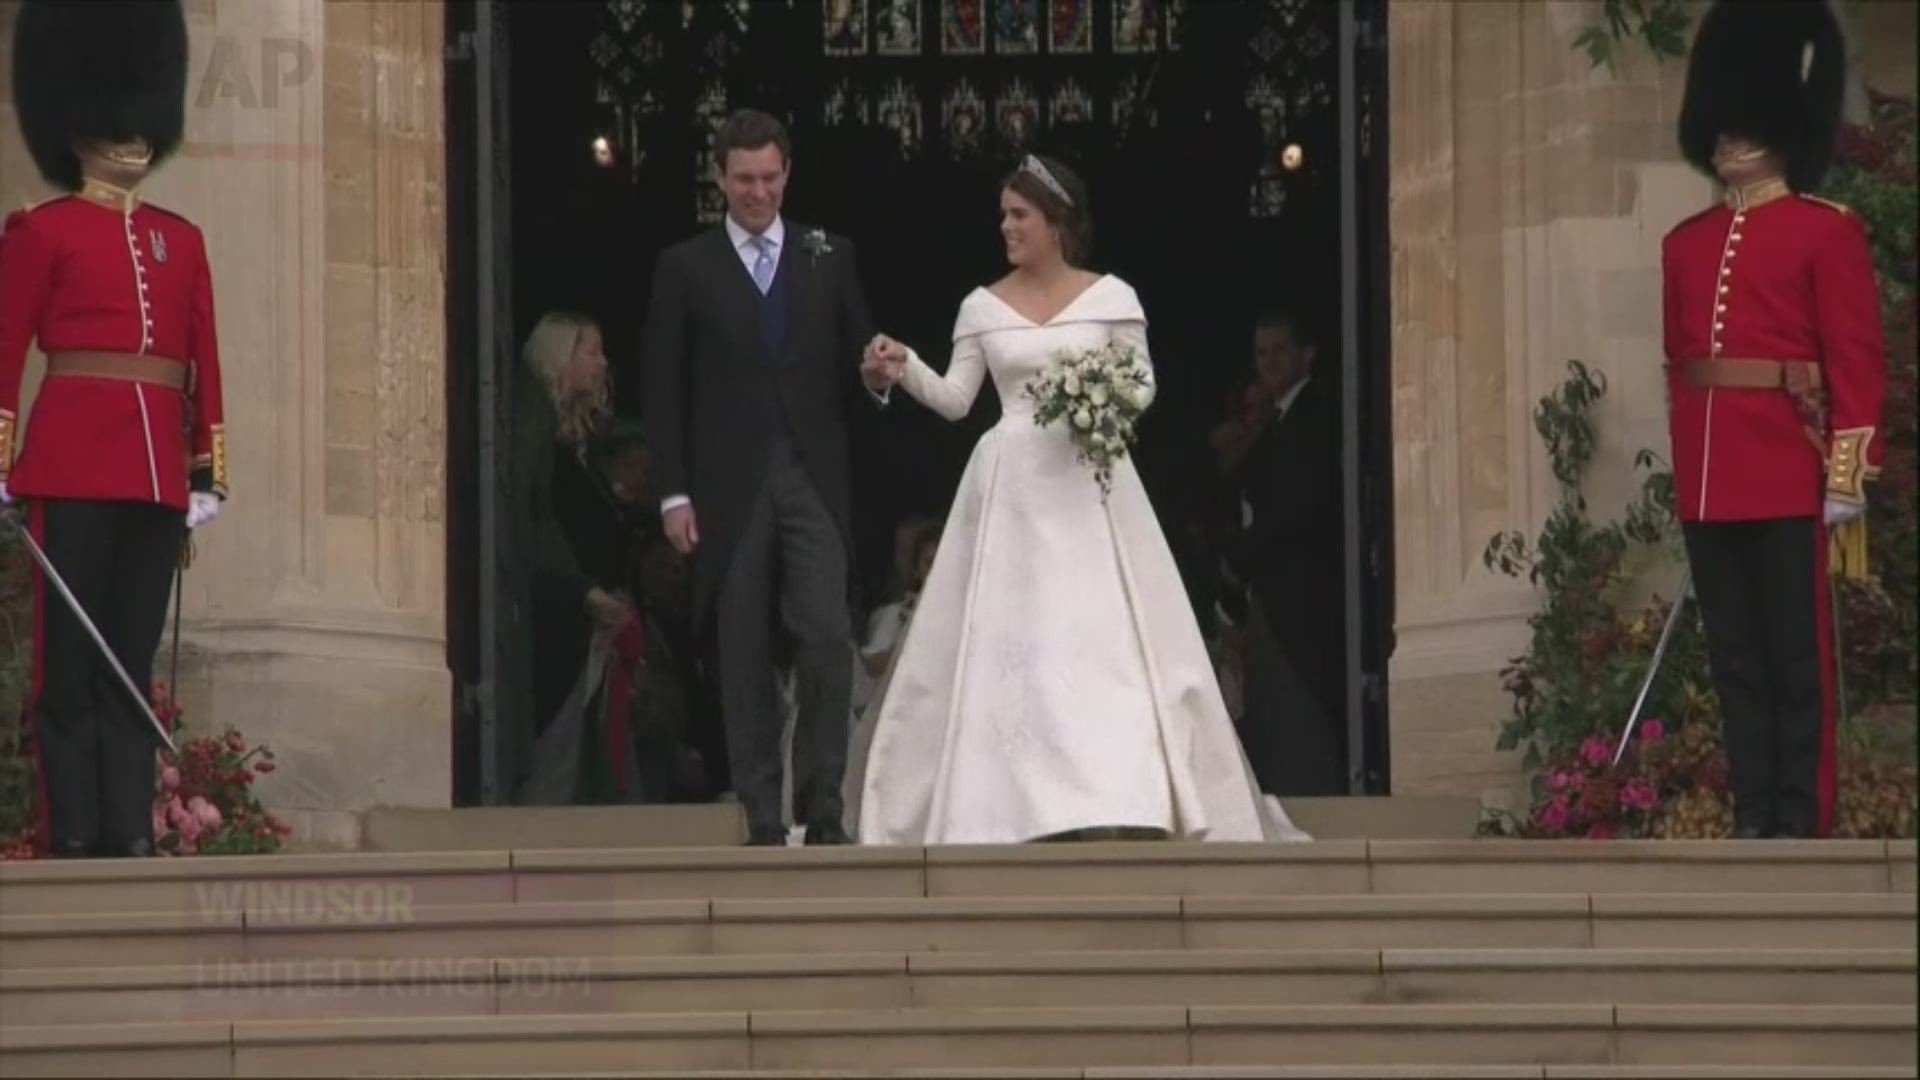 Newlyweds Princess Eugenie and Jack Brooksbank depart St. George's Chapel in carriage through Windsor, as the royal family looks on. (Oct. 12)